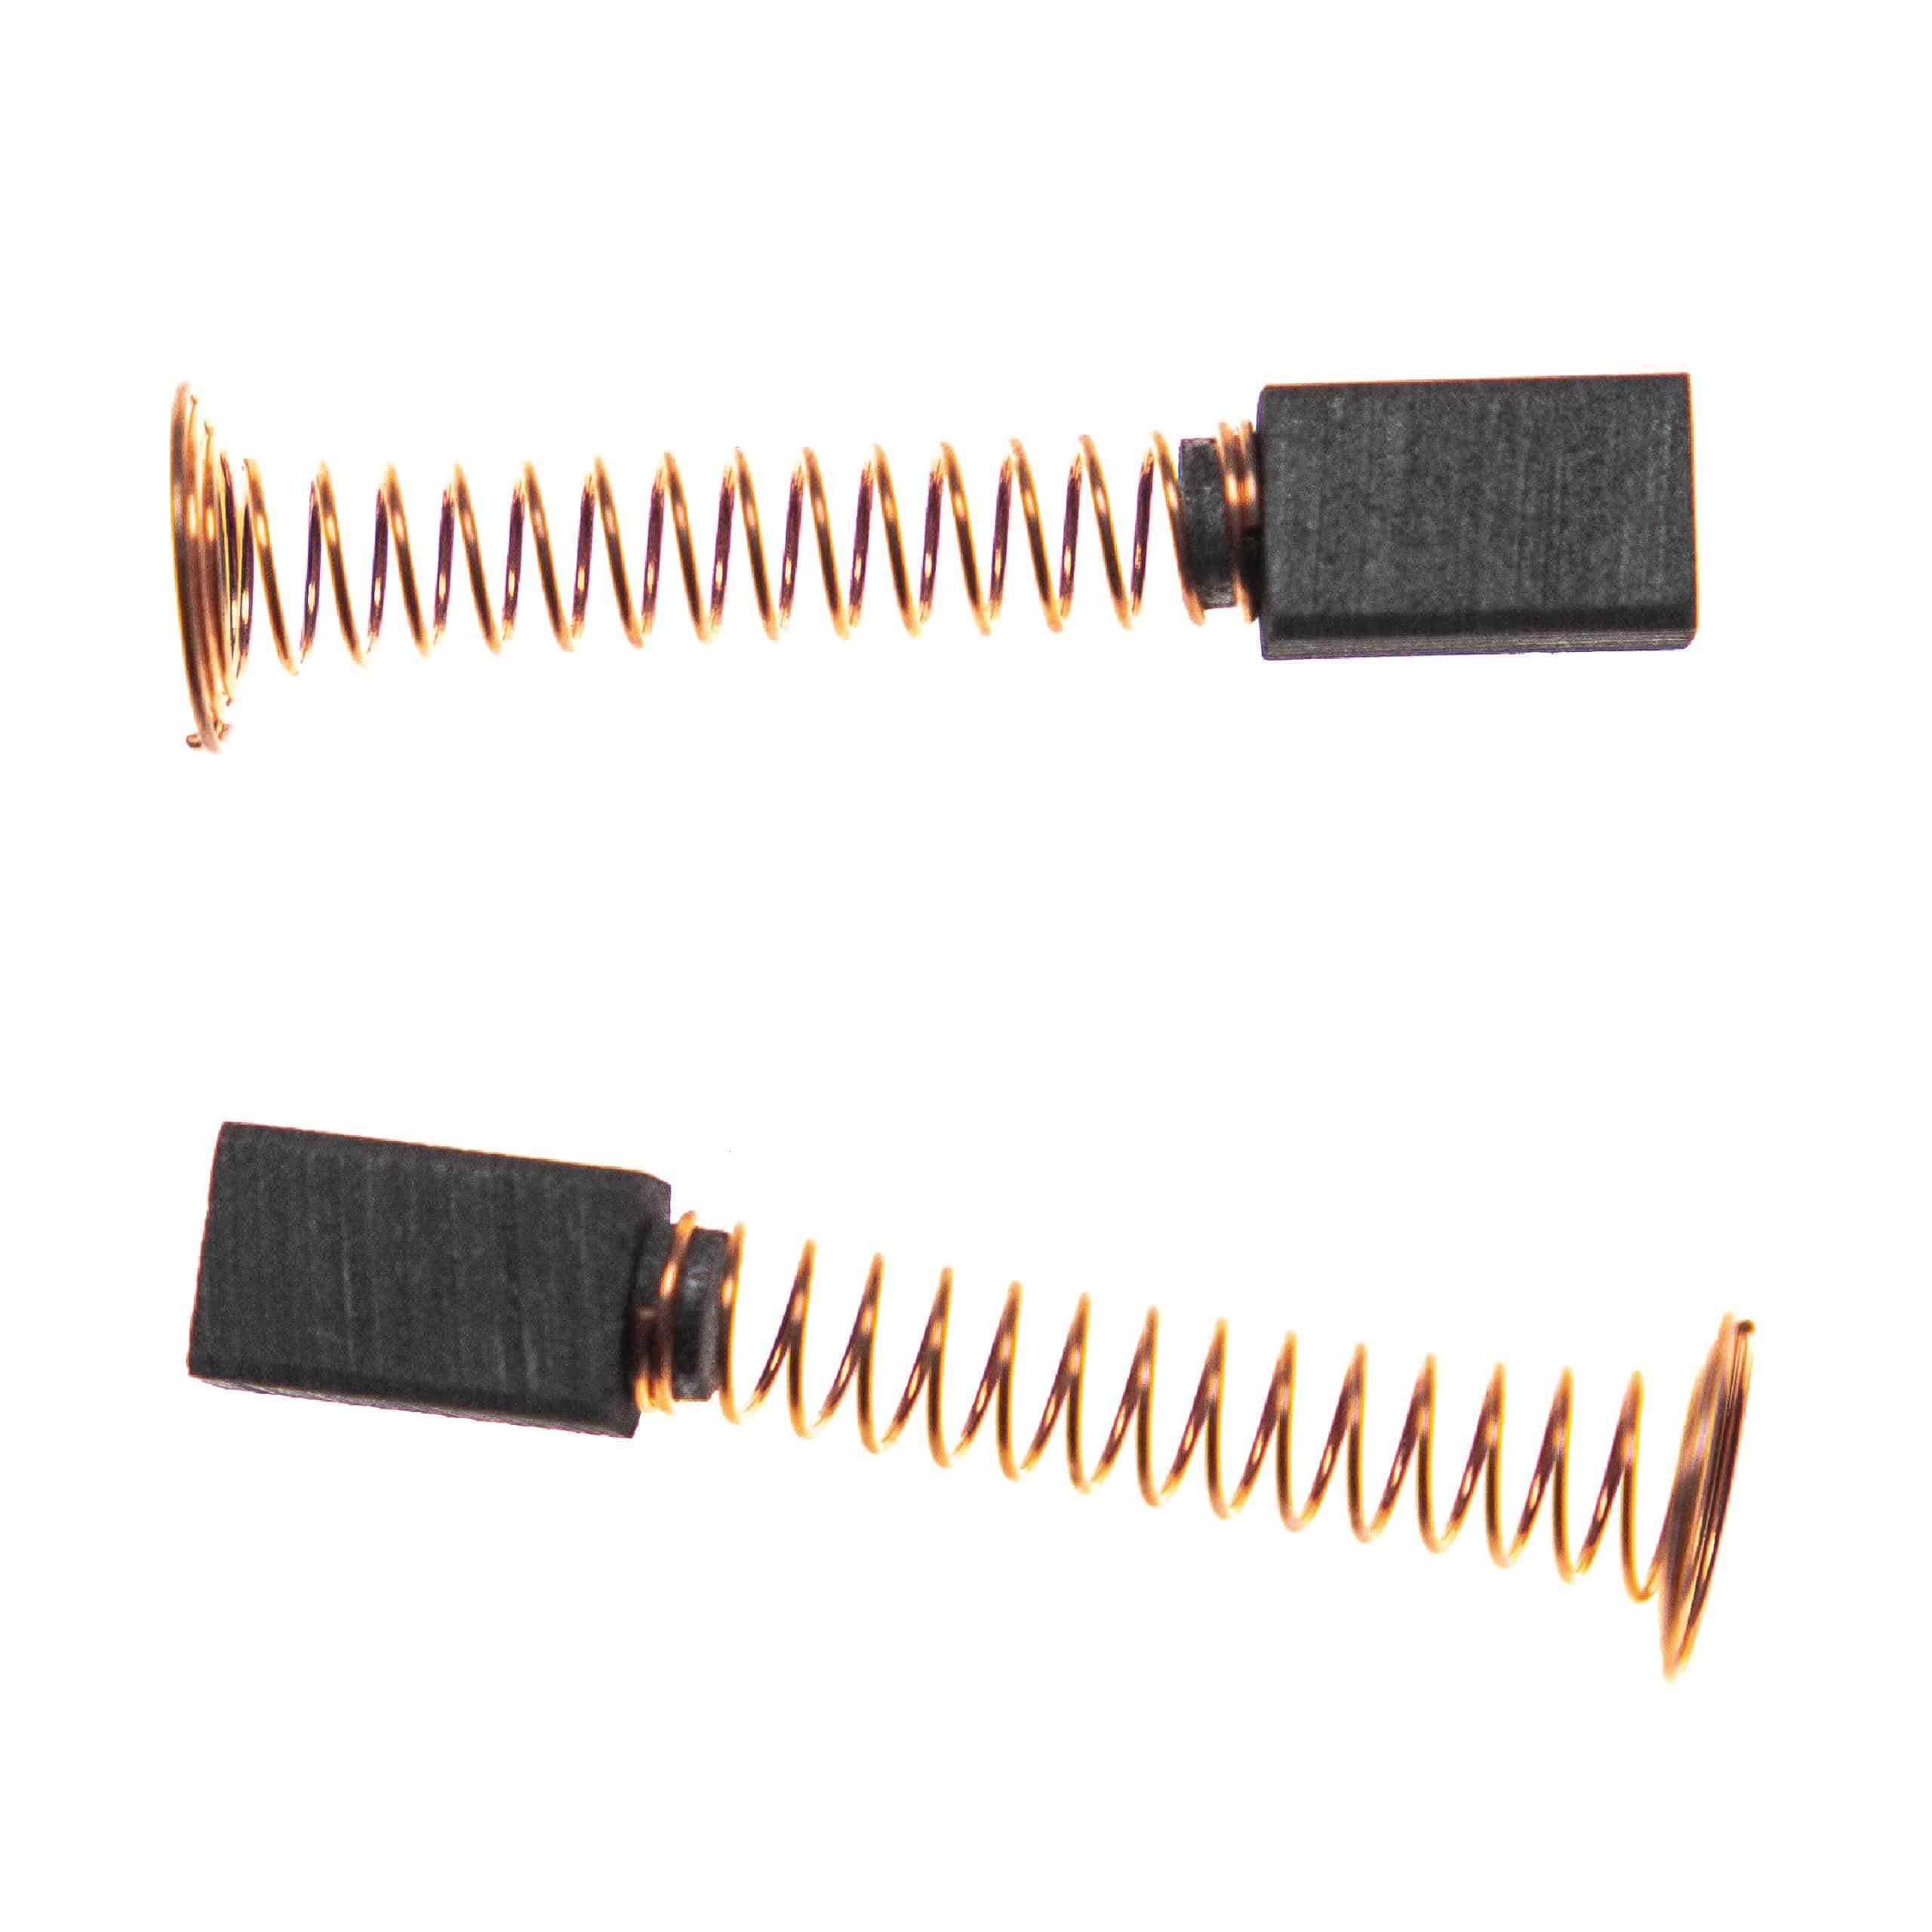 2x Carbon Brush as Replacement for Dremel DREM5646 Electric Power Tools + Spring, 9.7 x 6 x 4.75mm